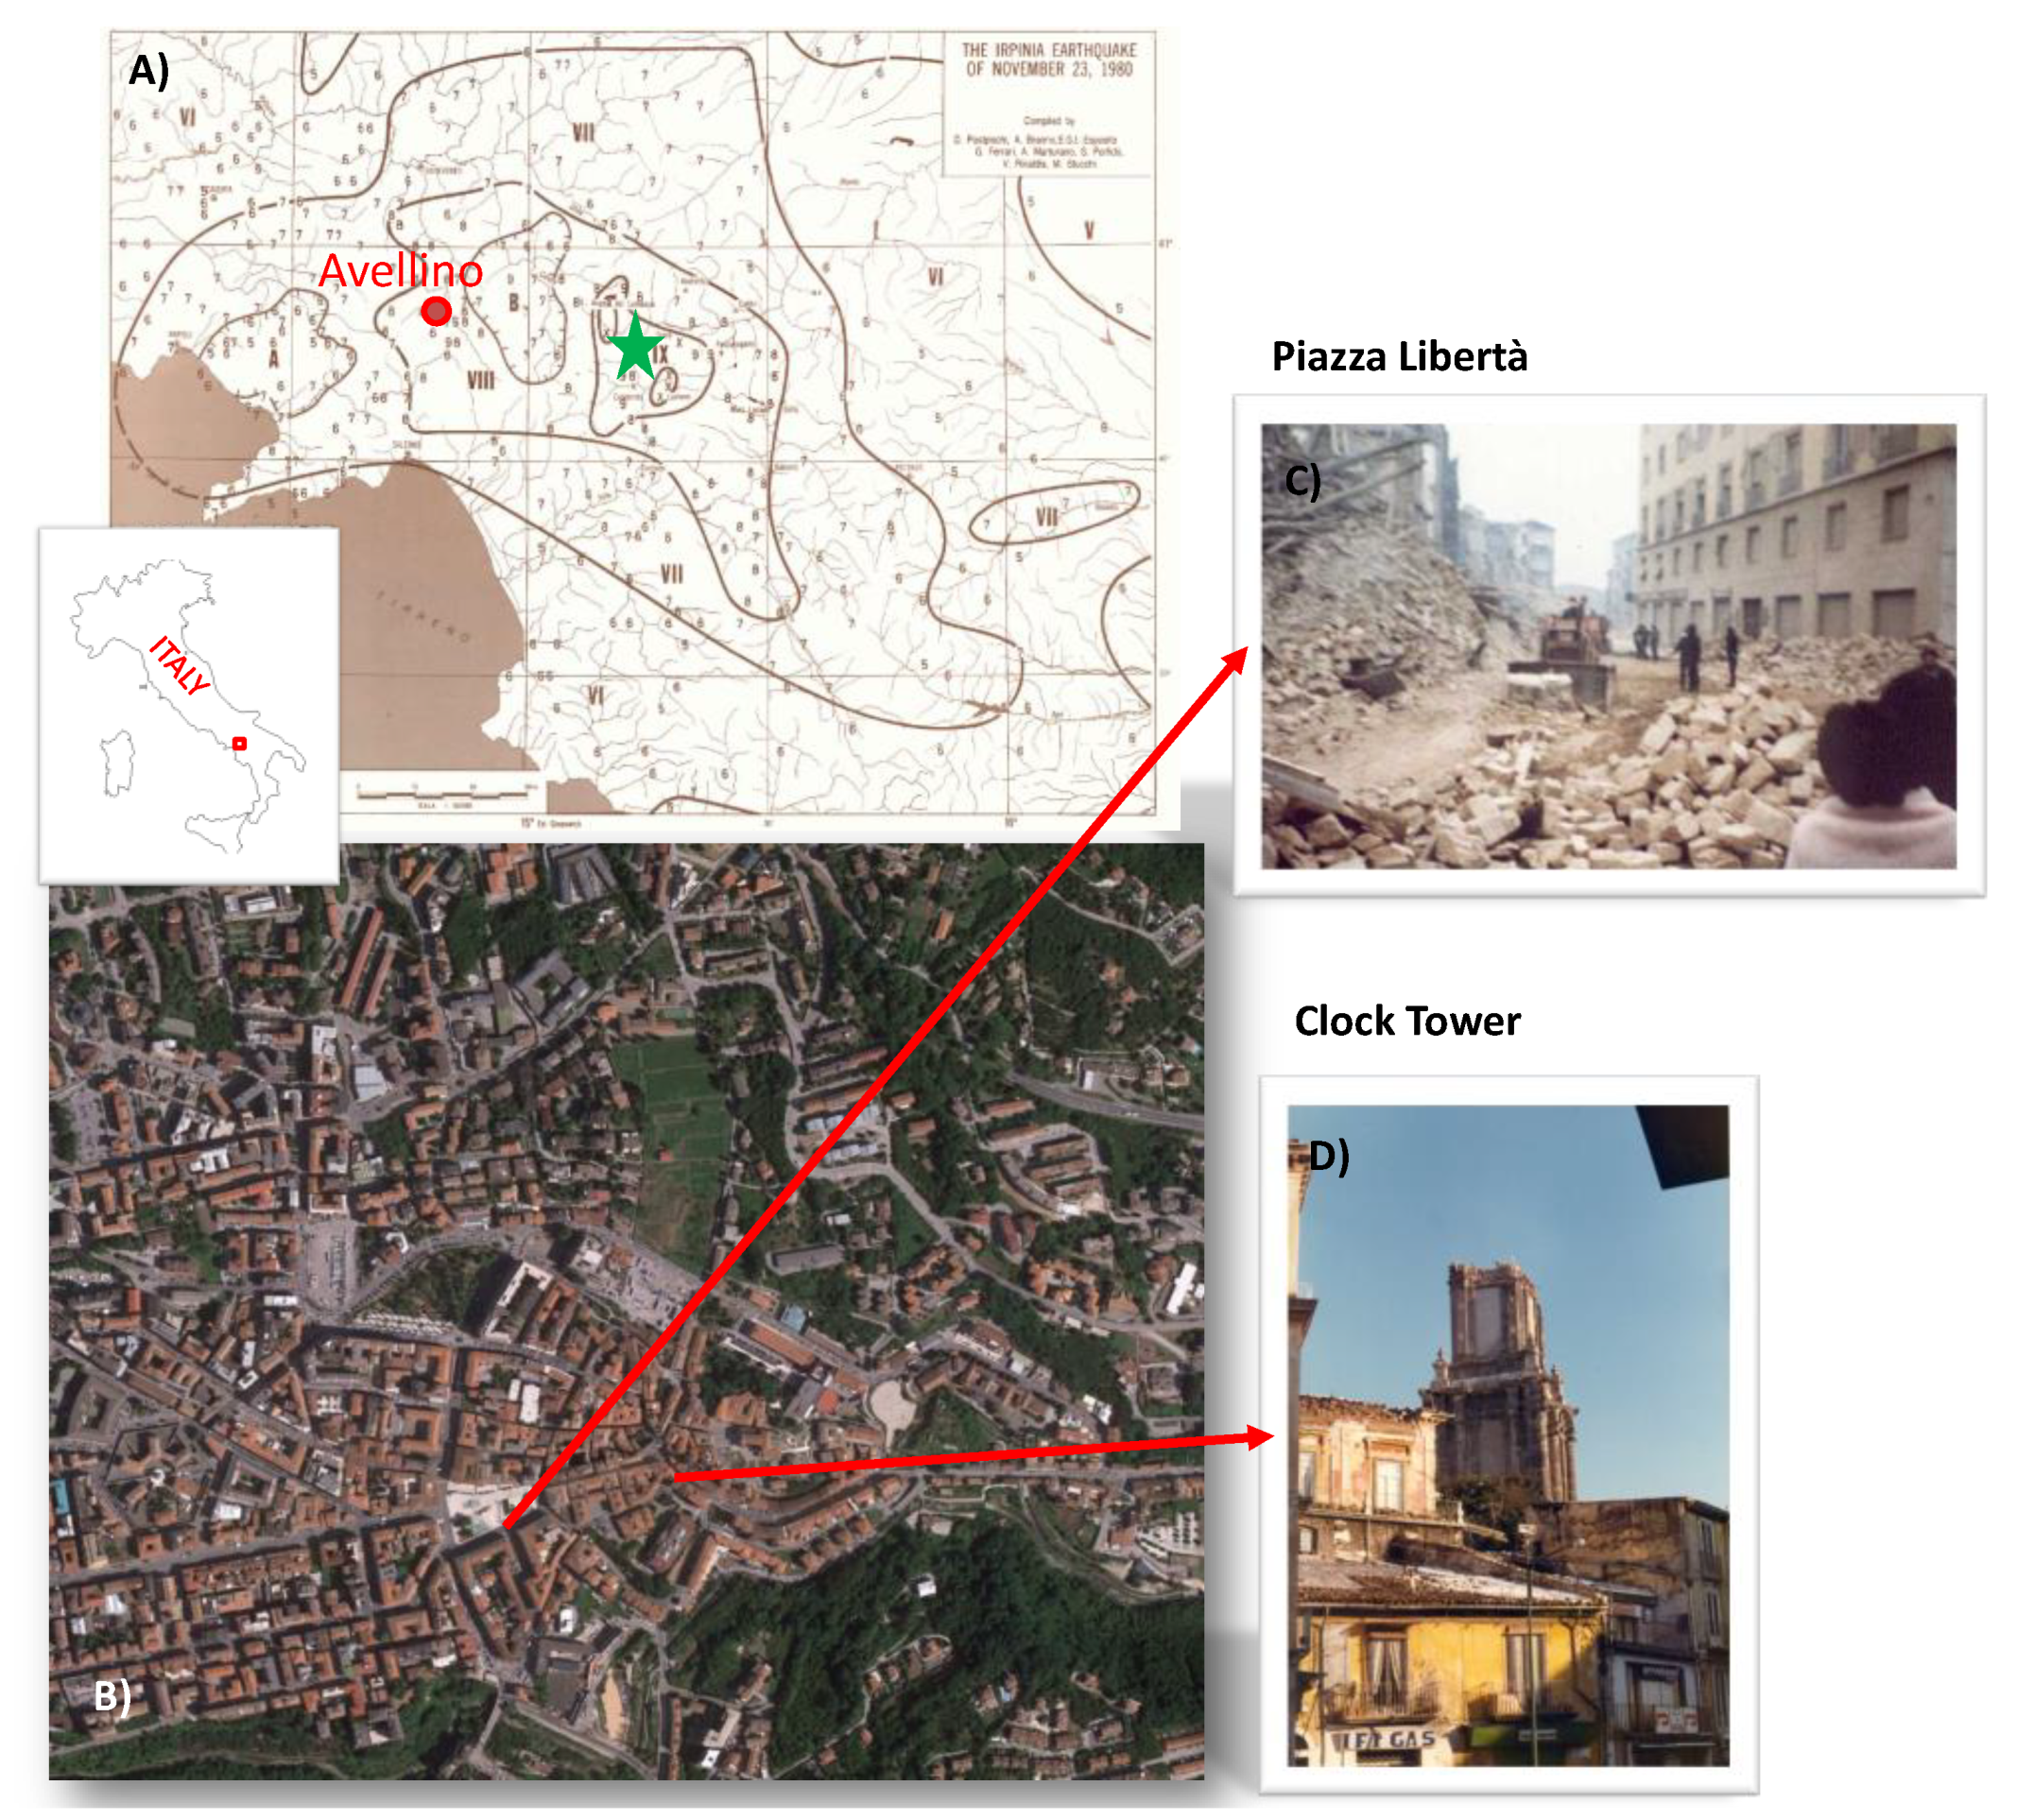 Geosciences | Free Full-Text | Ground Response and Historical Buildings in  Avellino (Campania, Southern Italy): Clues from a Retrospective View  Concerning the 1980 Irpinia-Basilicata Earthquake | HTML